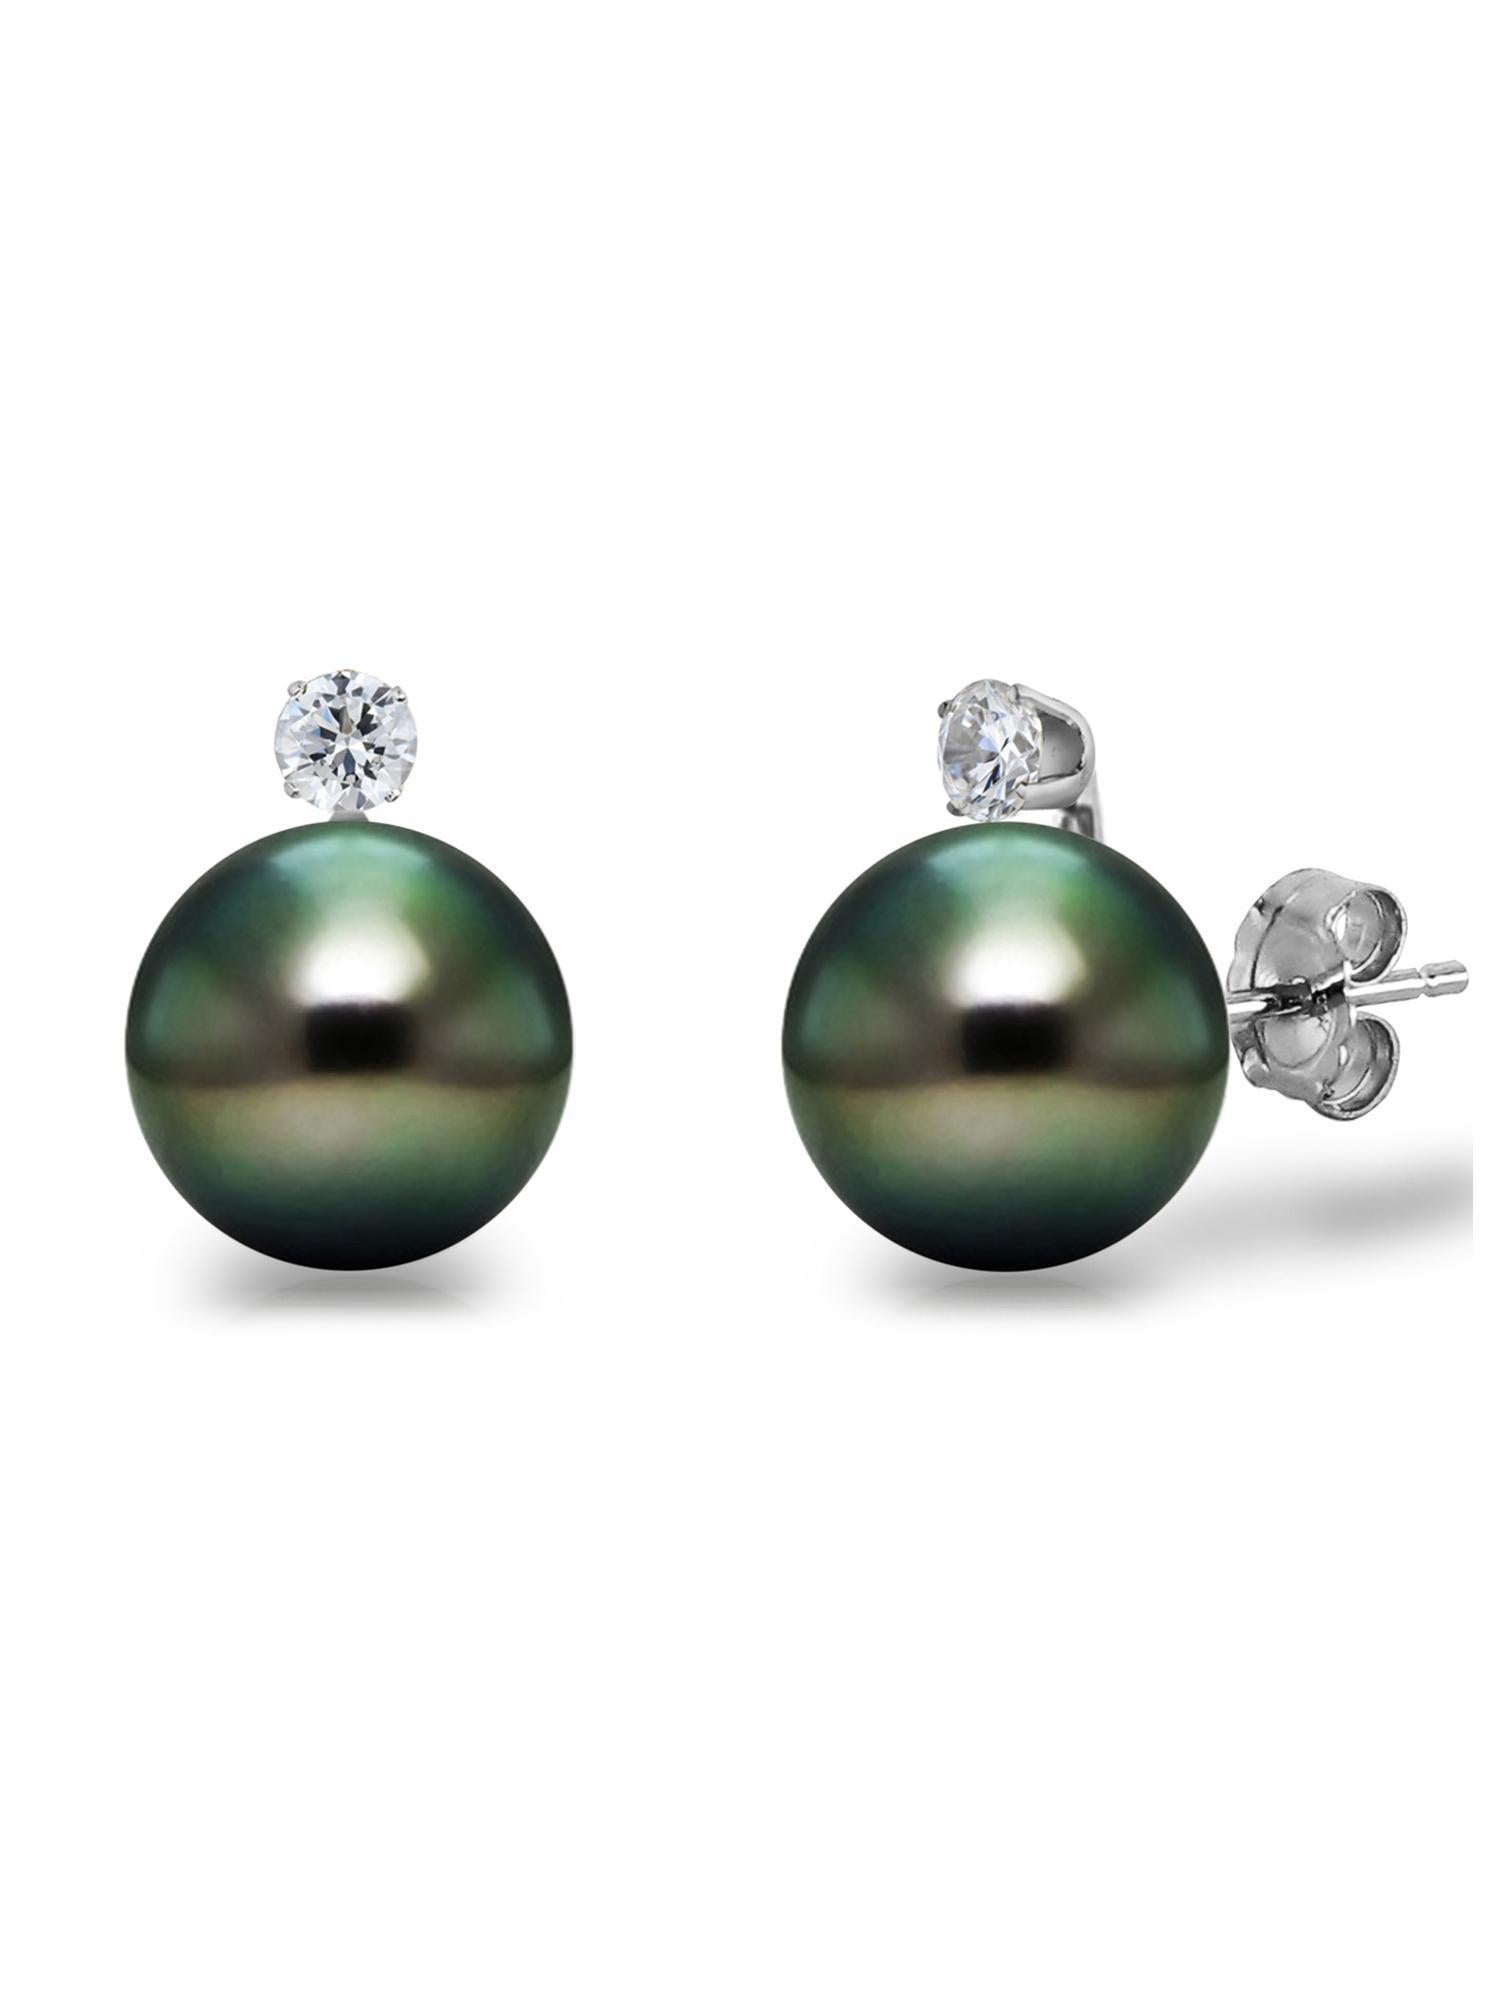 14 Karat Gold AAA Tahitian Cultured Pearls with 1/10 Carat Diamond Stud Earrings

Elegance and simplicity meet in this gorgeous earrings with sparkling diamonds These diamond pearl earrings are a gift everyone will enjoy. A feminine piece of jewelry